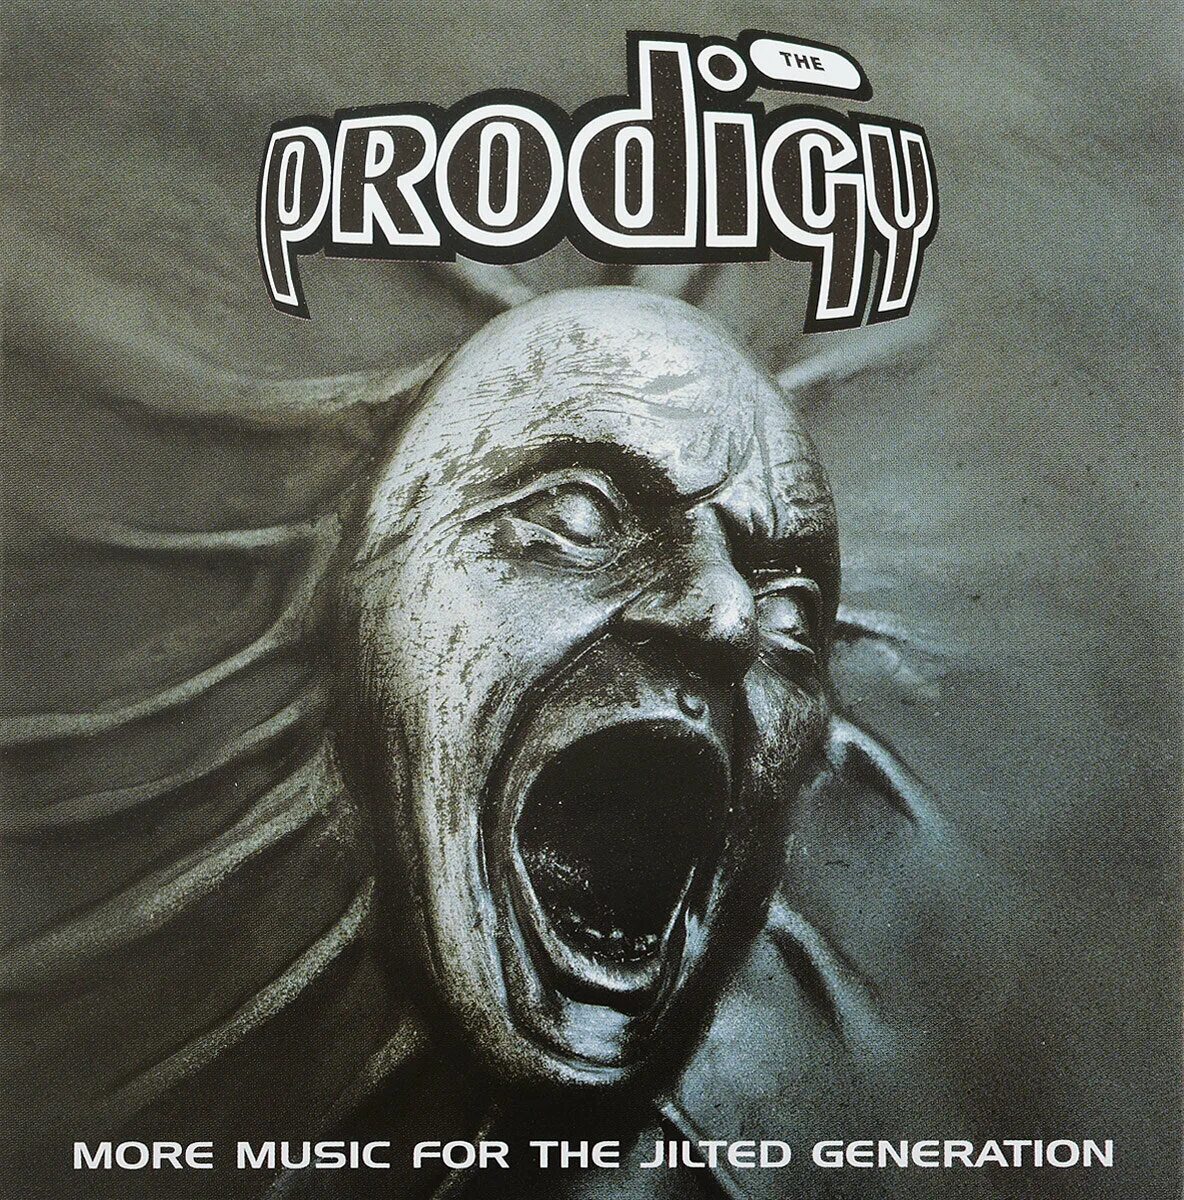 Music for the jilted generation. Music for the jilted Generation the Prodigy. The Prodigy Music for the jilted Generation обложка альбома.